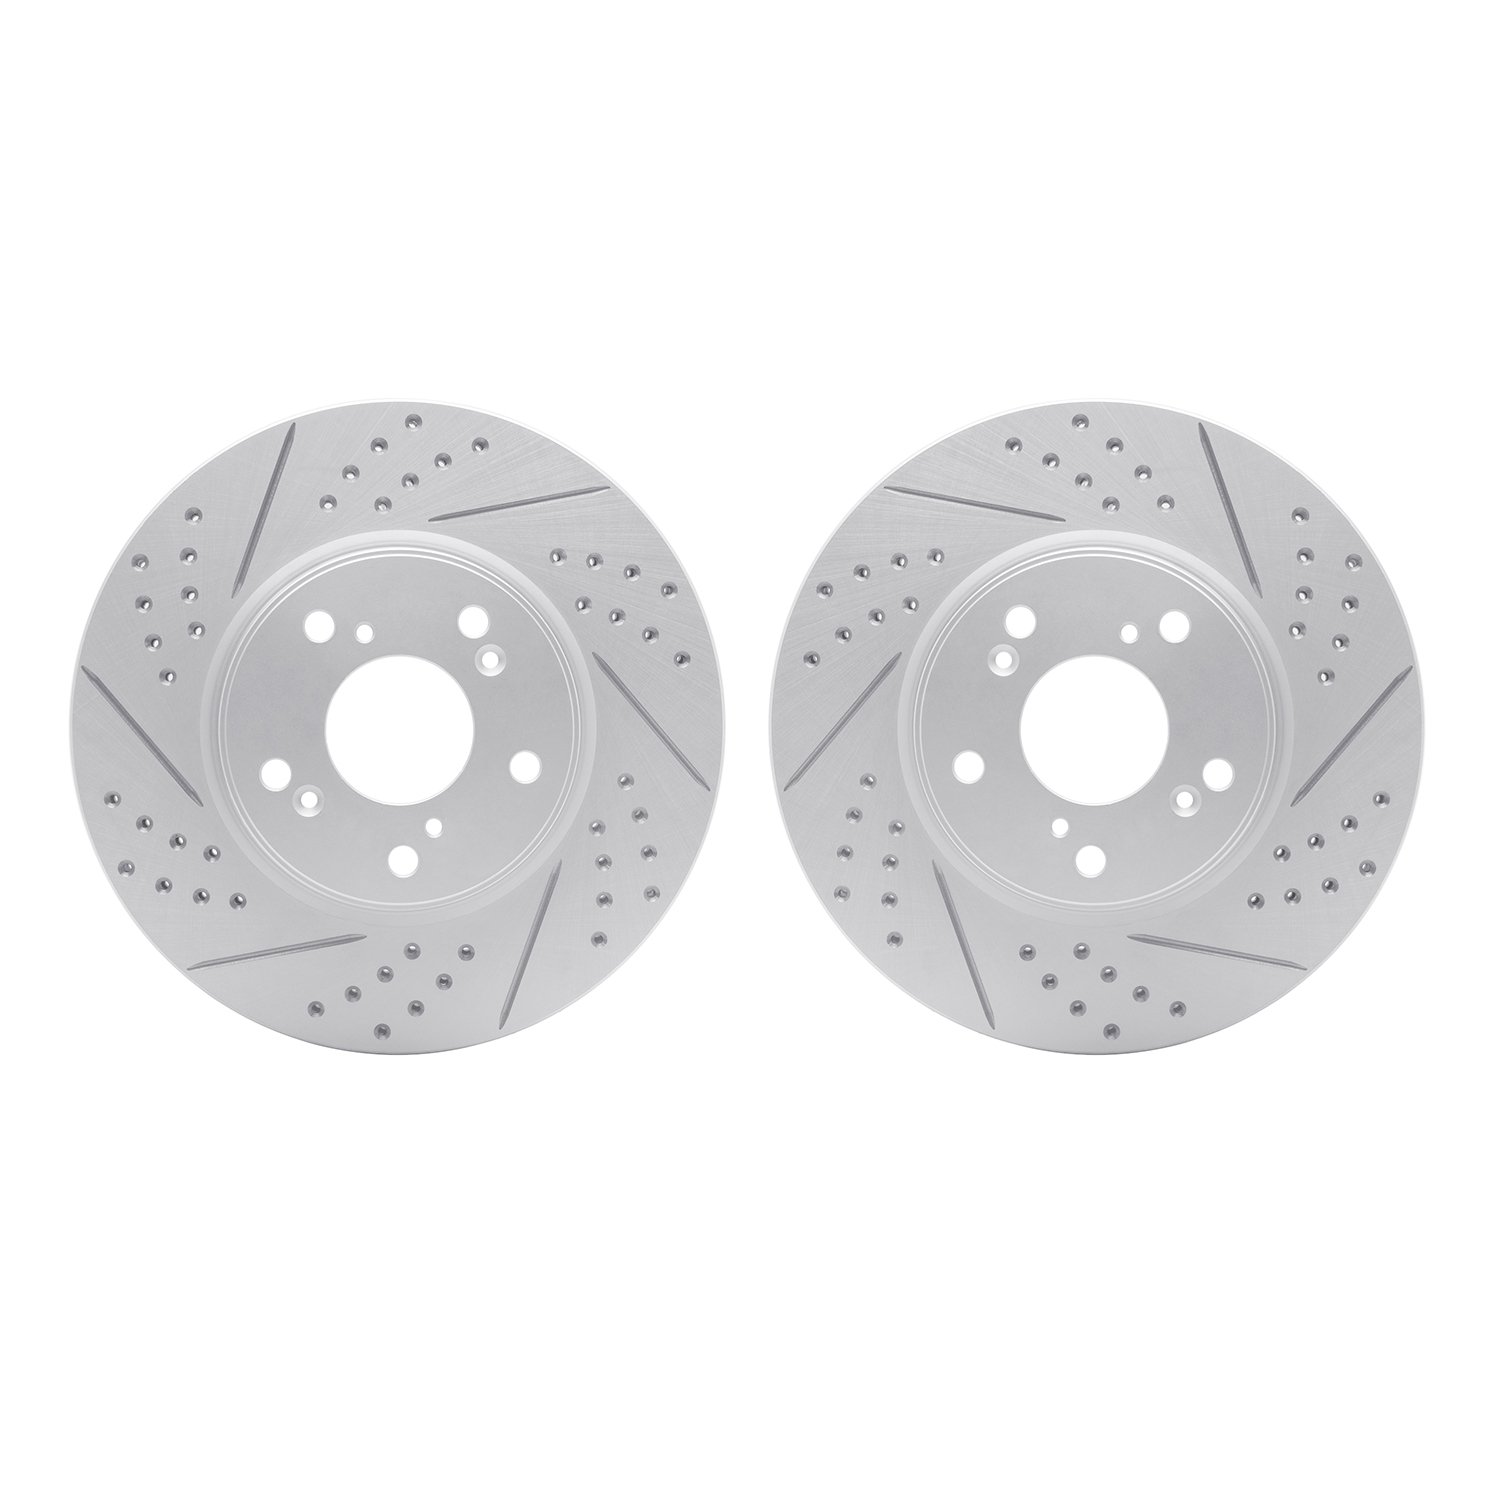 2002-59017 Geoperformance Drilled/Slotted Brake Rotors, Fits Select Acura/Honda, Position: Front